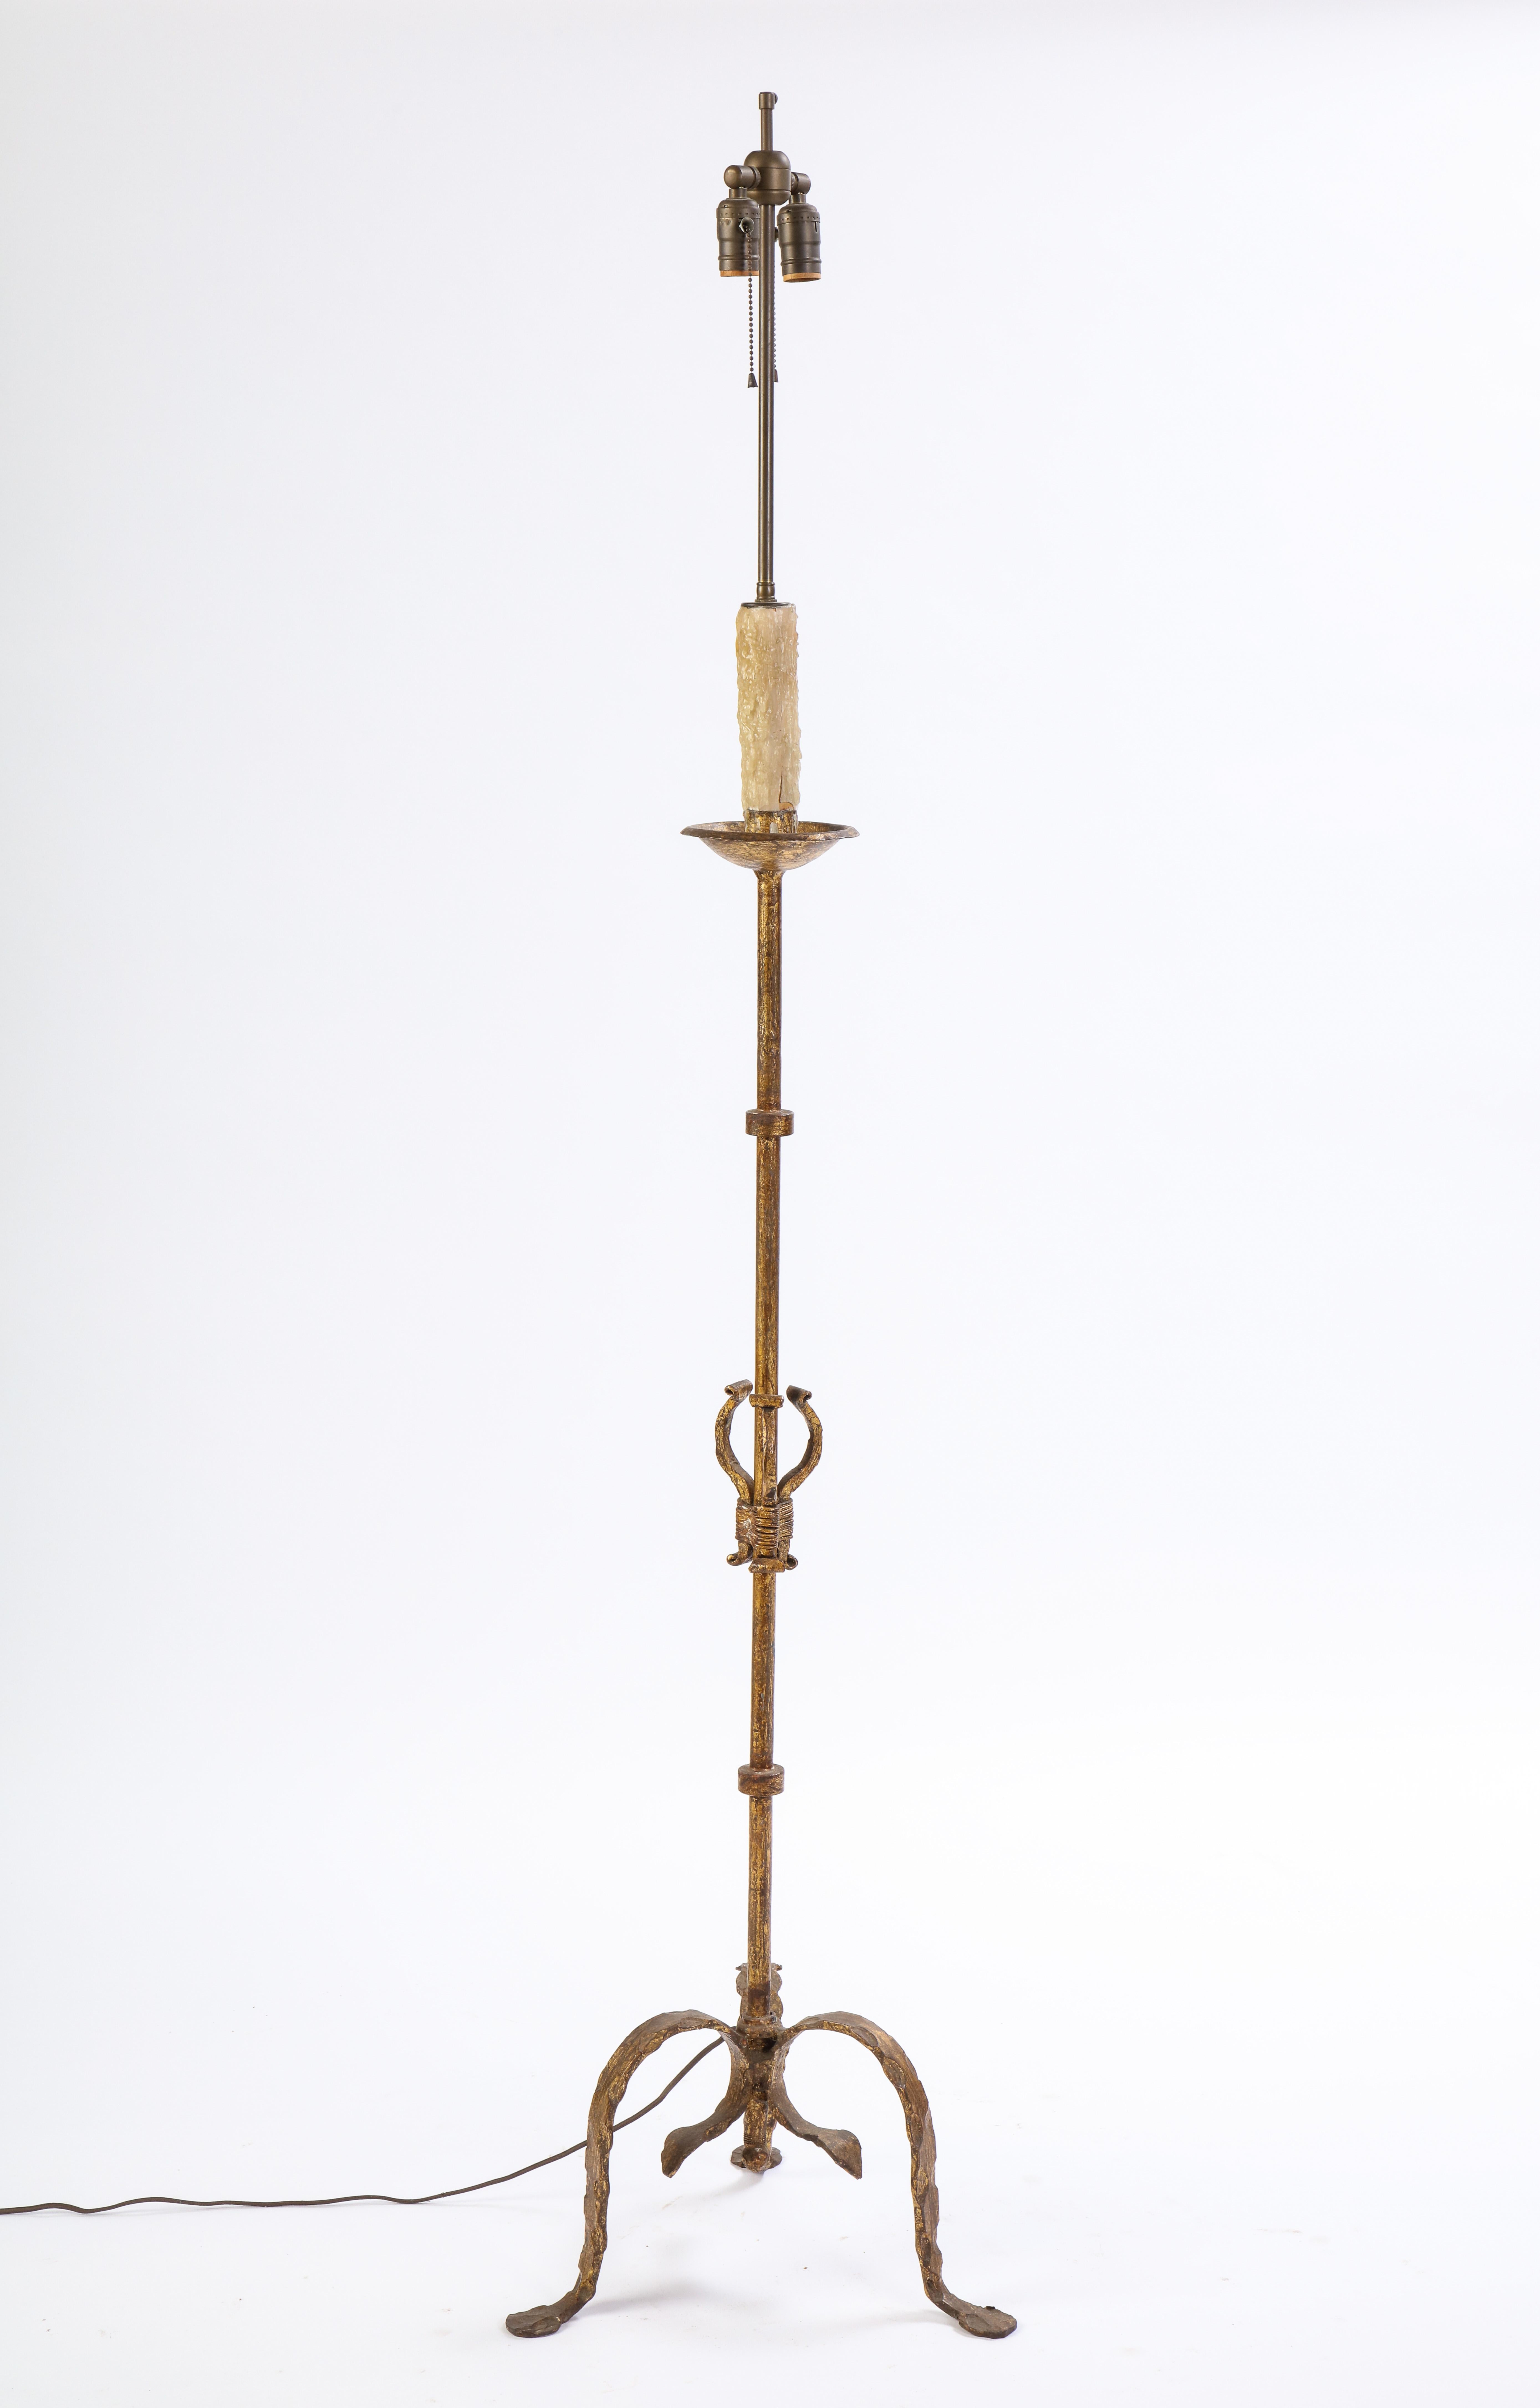 This gilt wrought-iron, modern large floor lamp, is raised on three molded legs with padded feet. It features a twisted wrought-iron stand and feet, with decorative scroll work detail and a faux beeswax candle in the center. 71.5 inches in height.